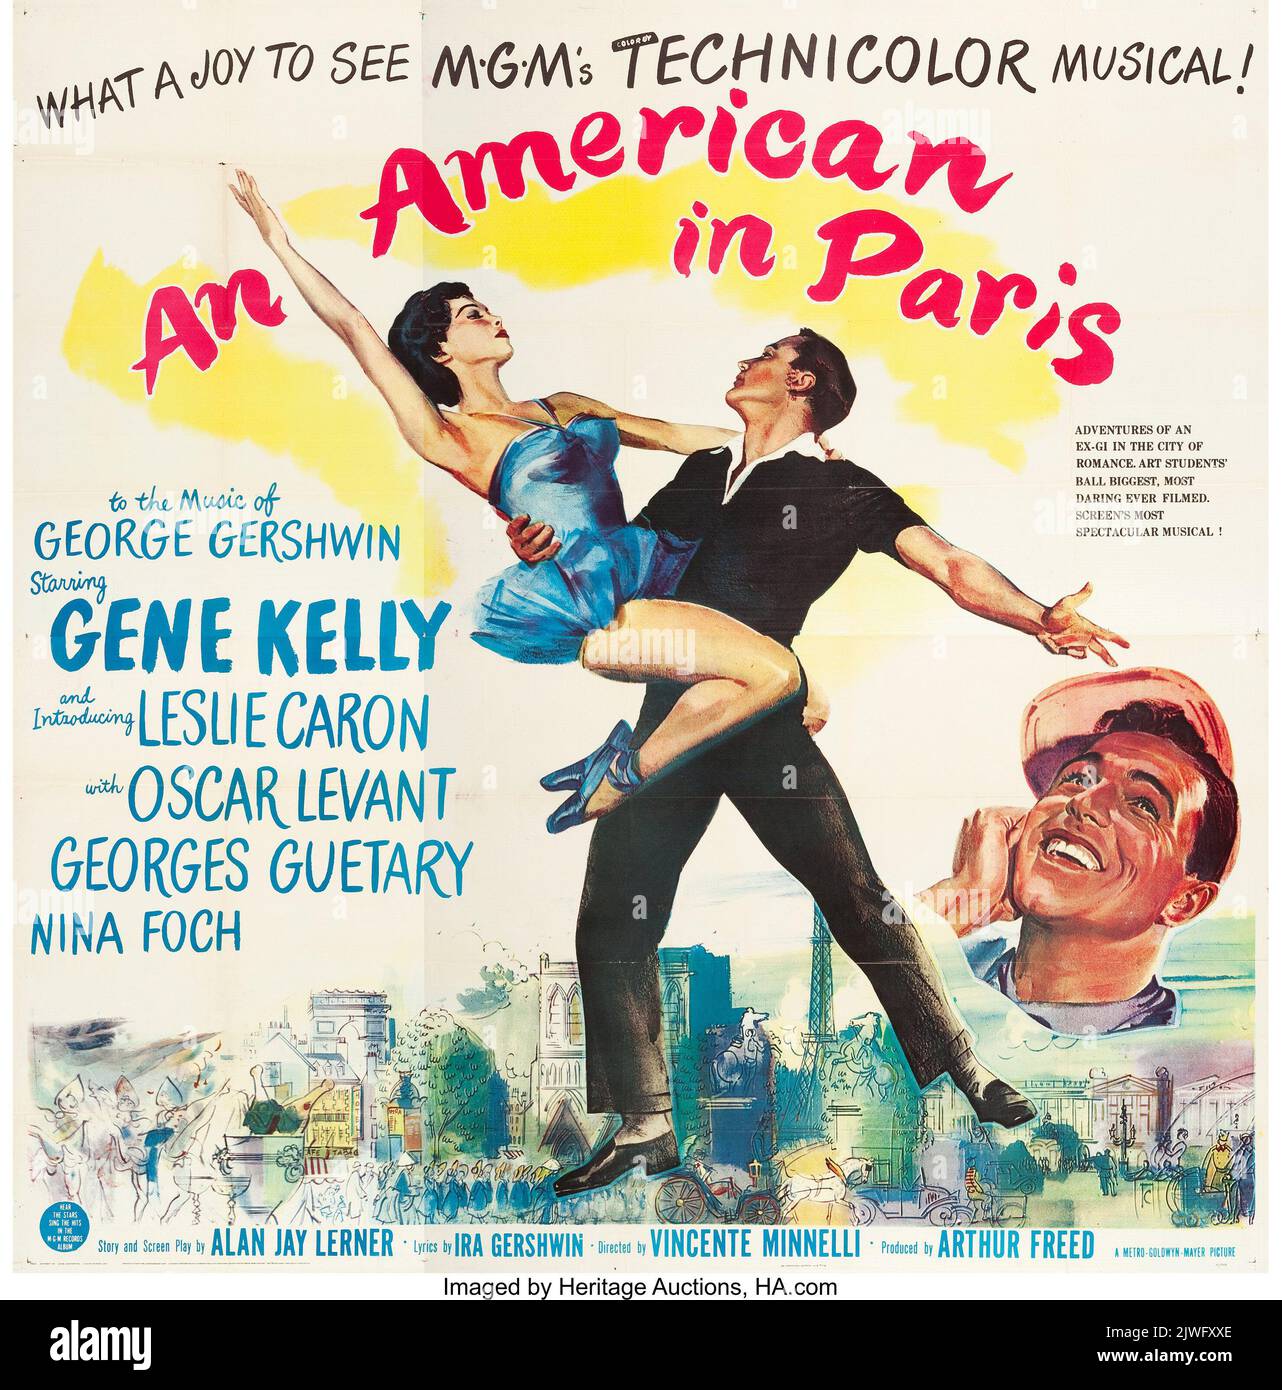 Vintage movie poster - An American in Paris (MGM, 1951). Six Sheet film poster feat. Gene Kelly. Stock Photo